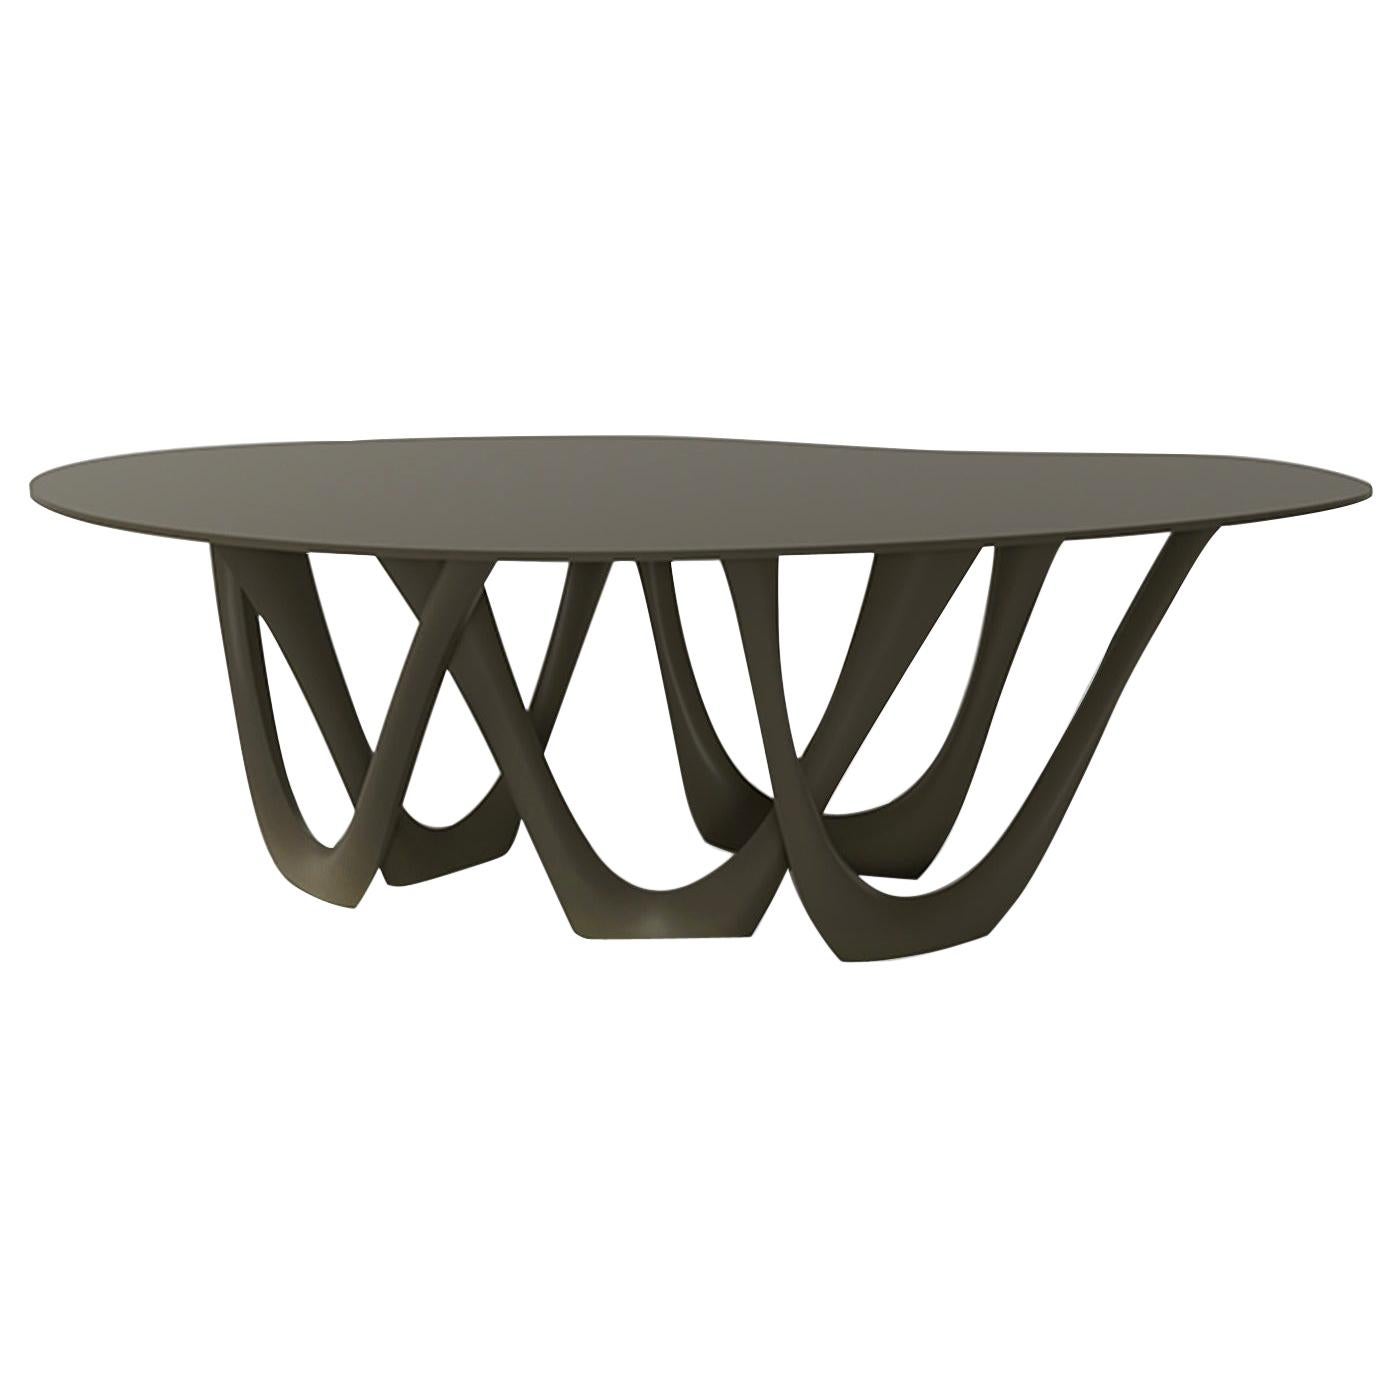 G-Table by Zieta, Powder-Coated Top and Base 'Umbra Grey' For Sale